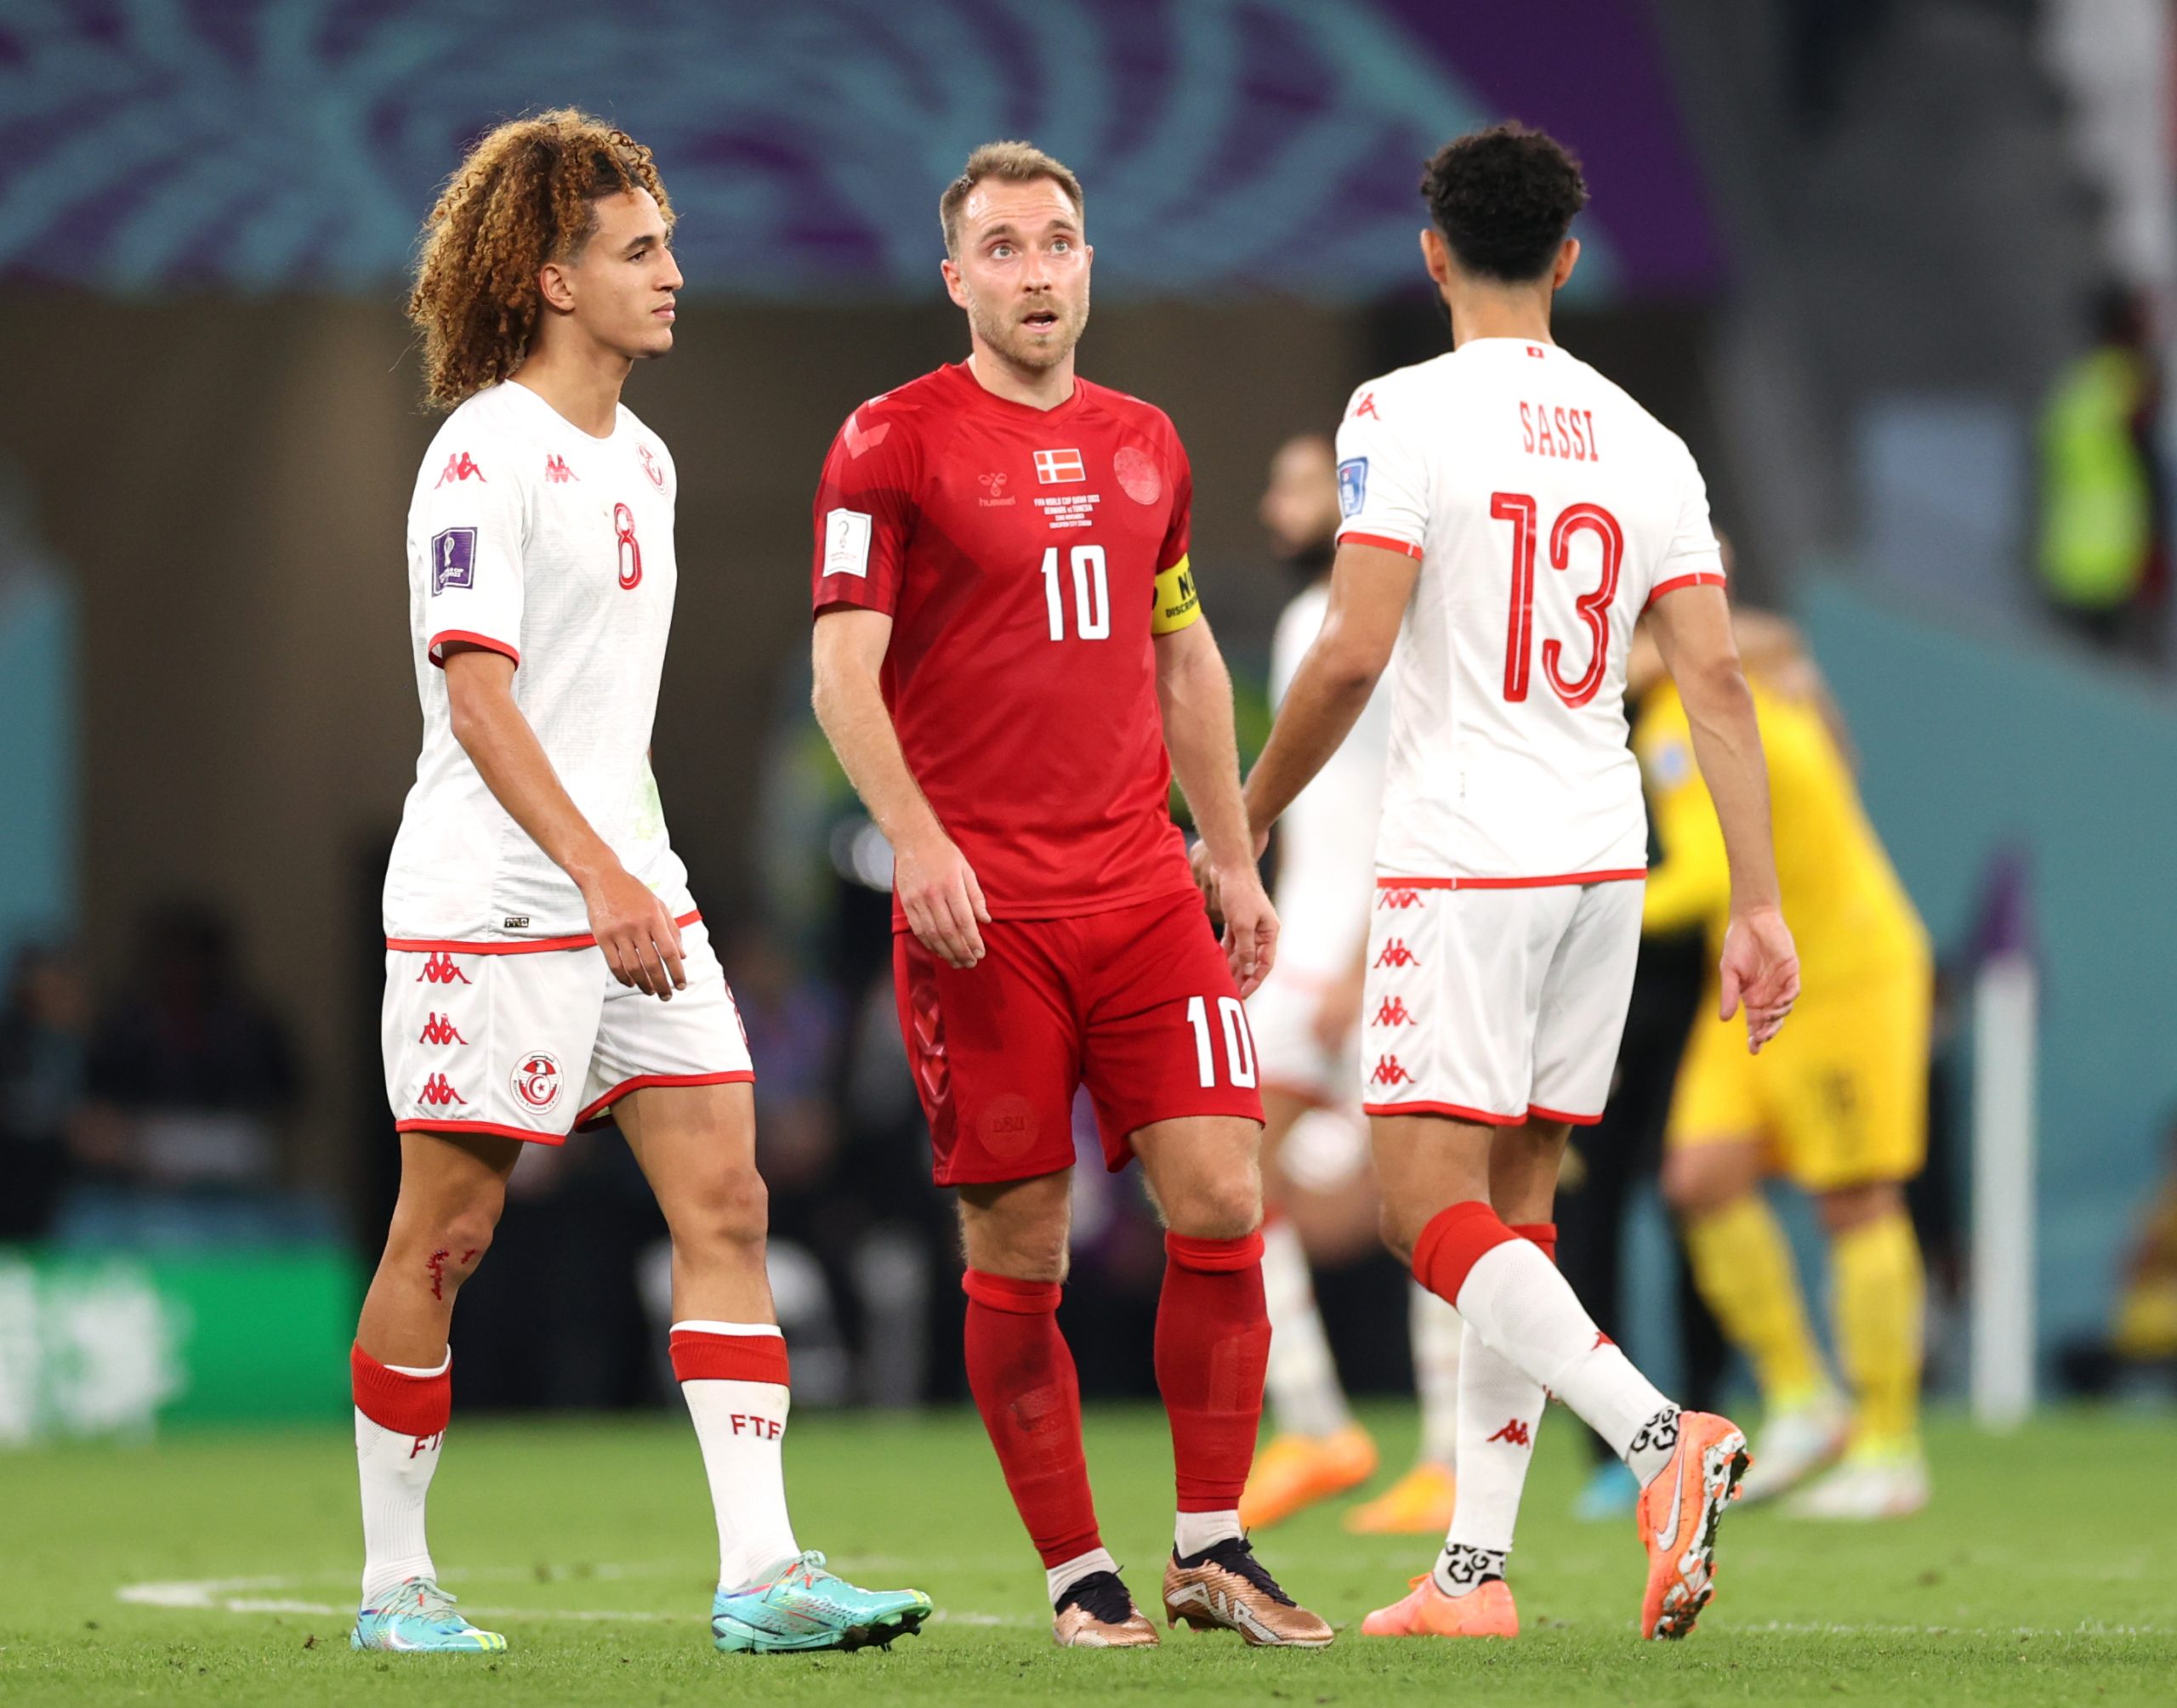 Christian Eriksen of Denmark speaks with Hannibal Mejbri of Tunisia after the 0-0 draw during the FIFA World Cup Qatar 2022 Group D match between Denmark and Tunisia at Education City Stadium on November 22, 2022 in Al Rayyan, Qatar.